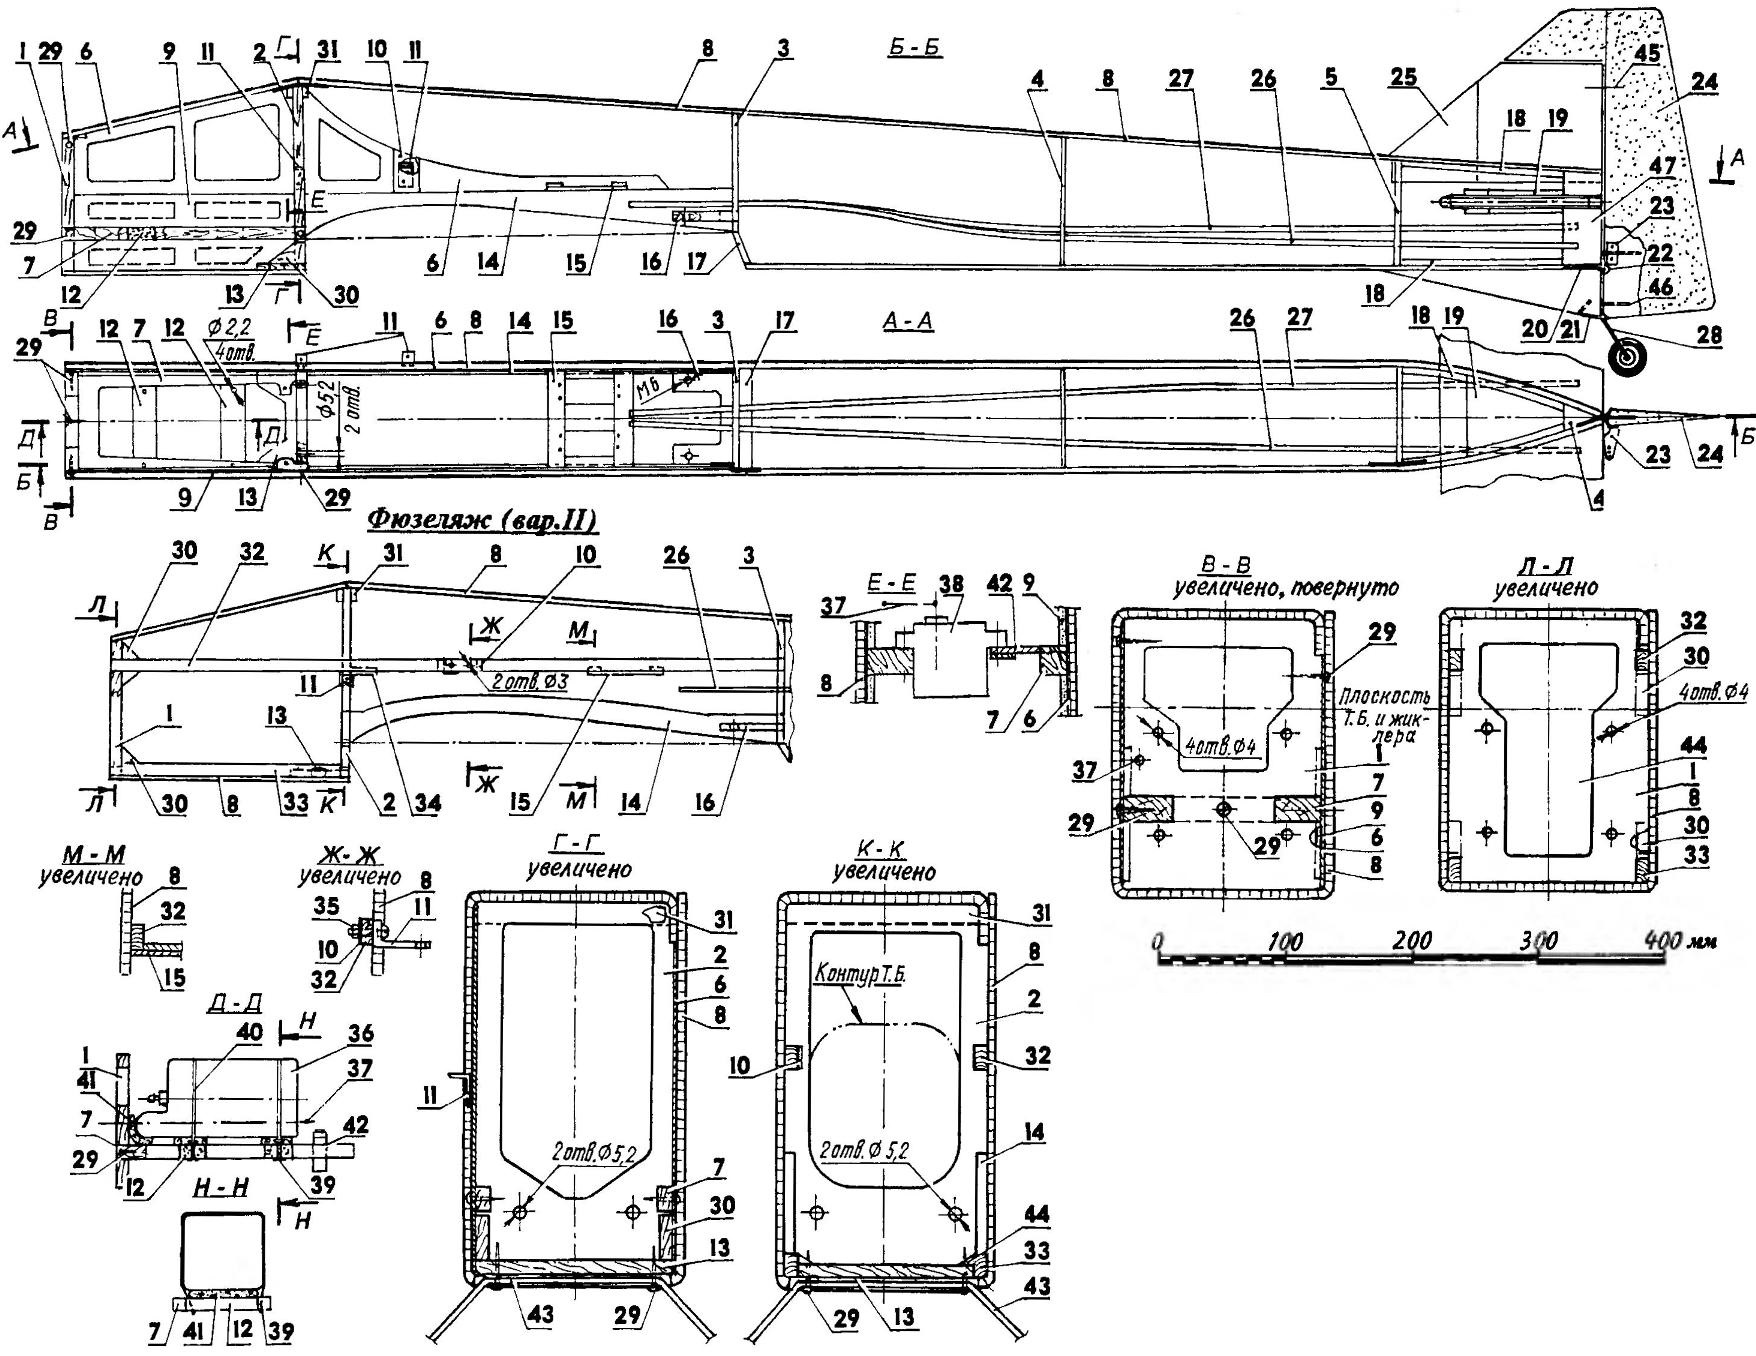 The fuselage of the training aircraft